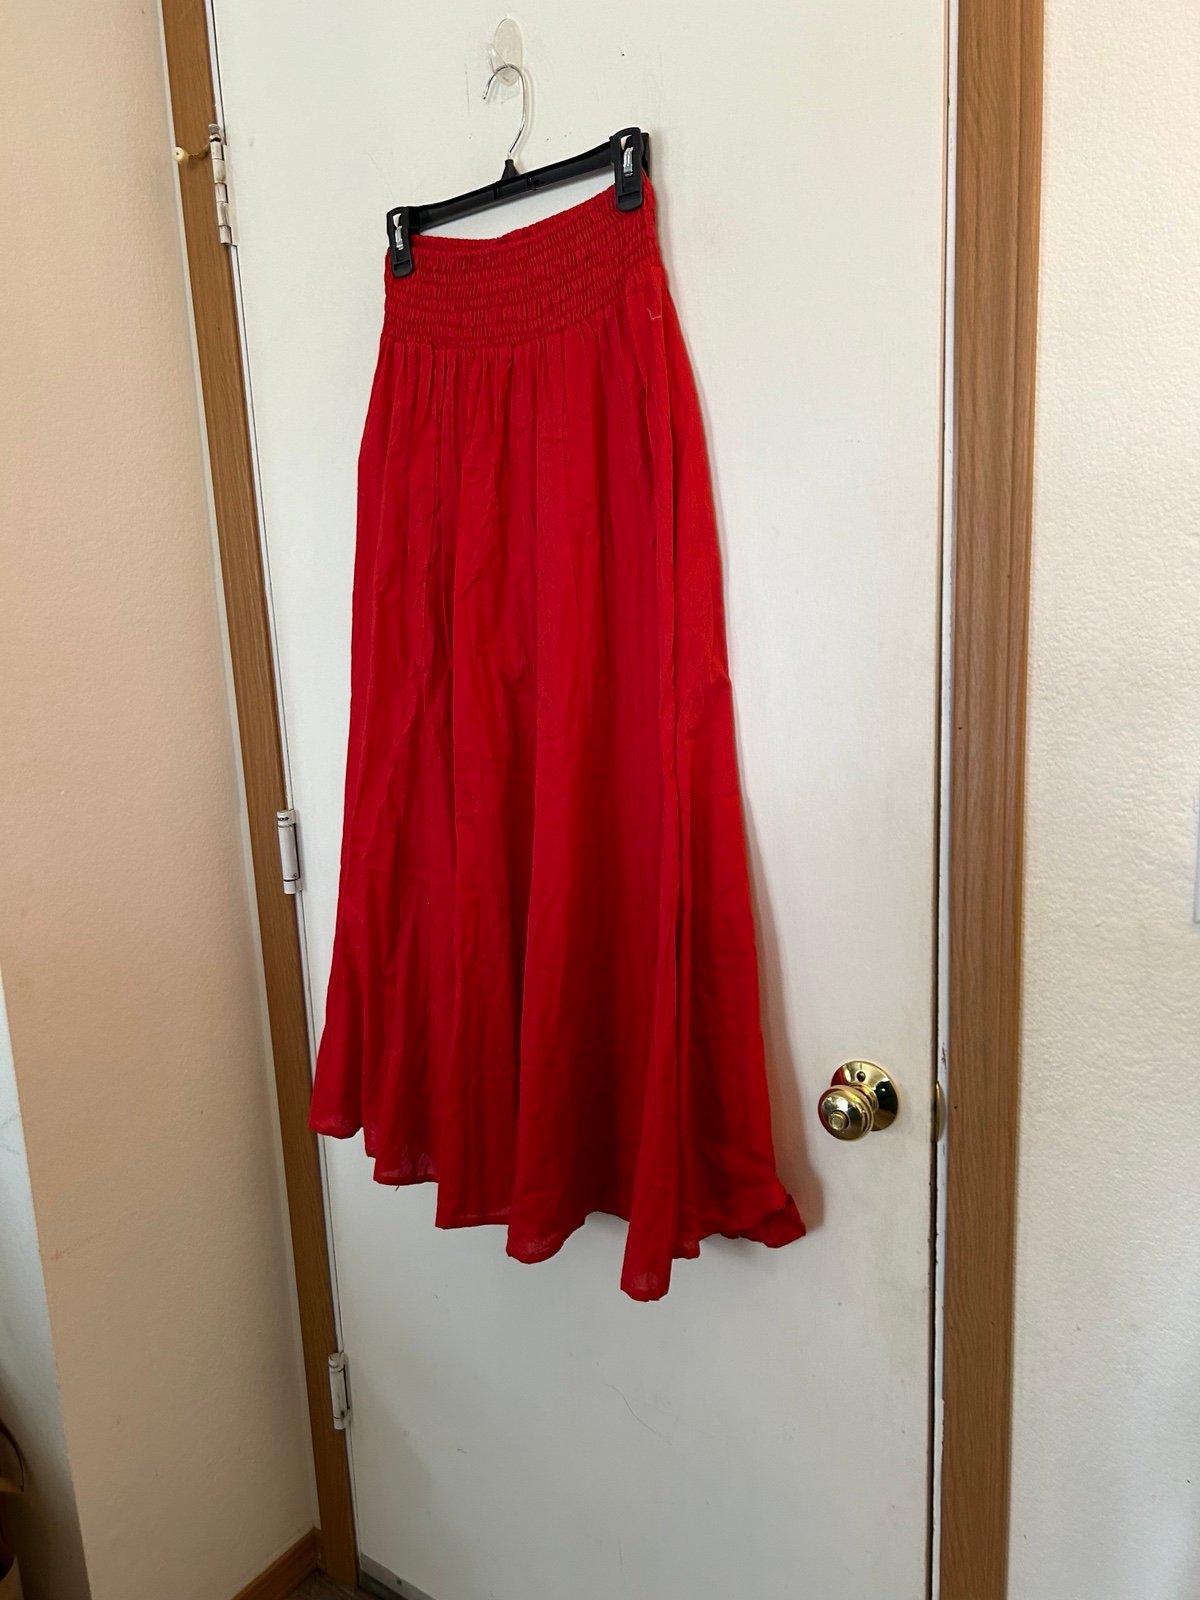 reasonable price NWT 100% Cotton Red stretch waist pull